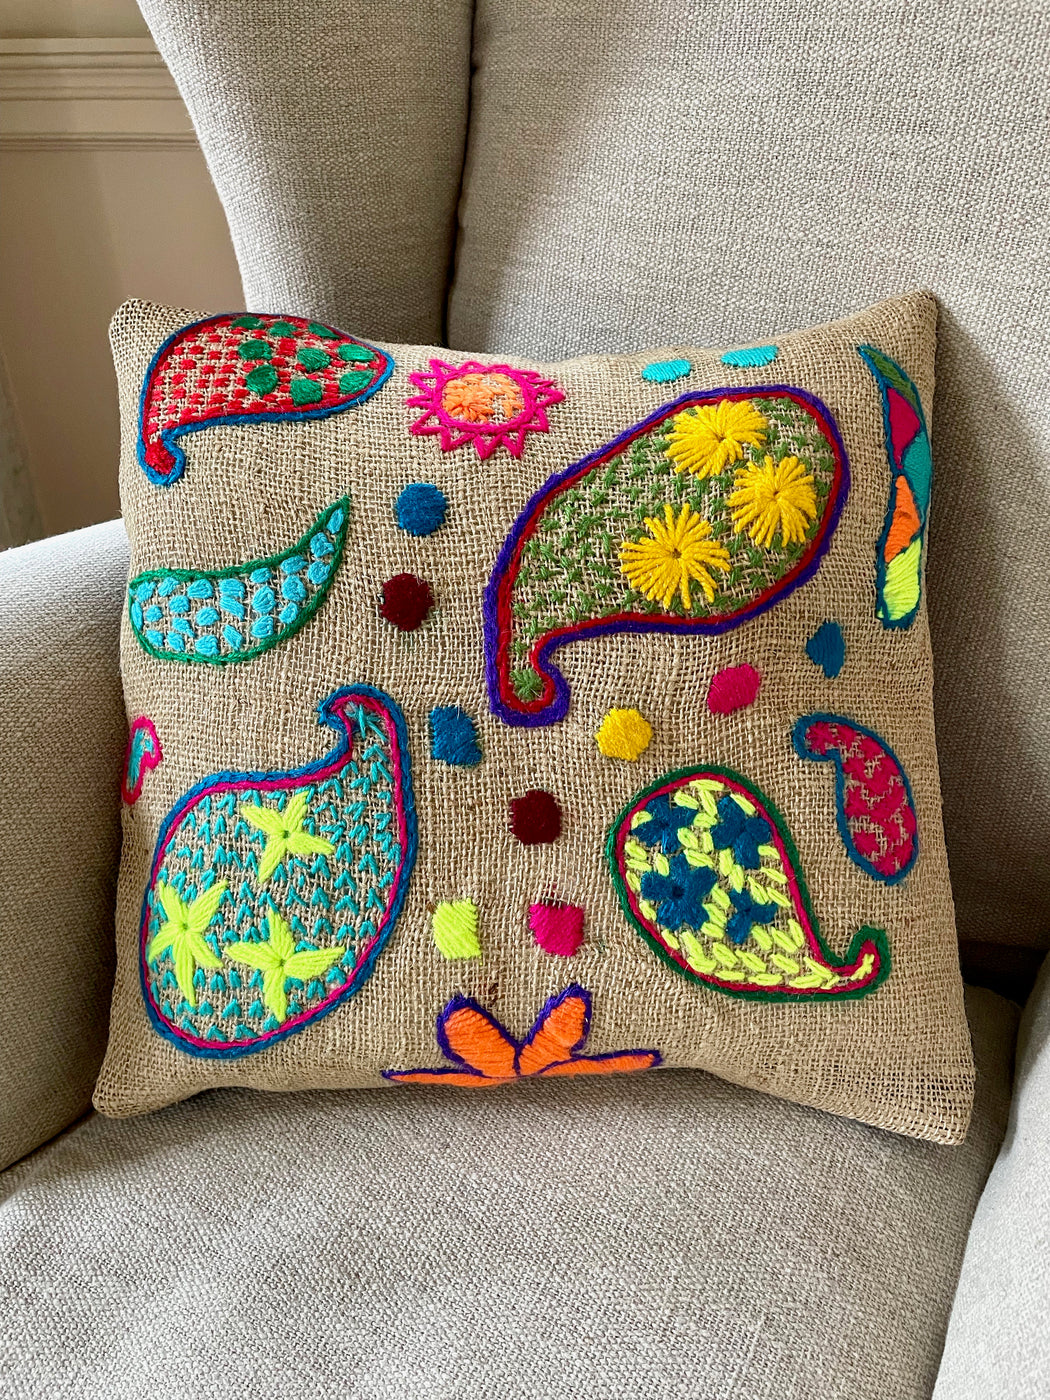 "Paisley" Hand-Embroidered Pillow by Nathalie Lete